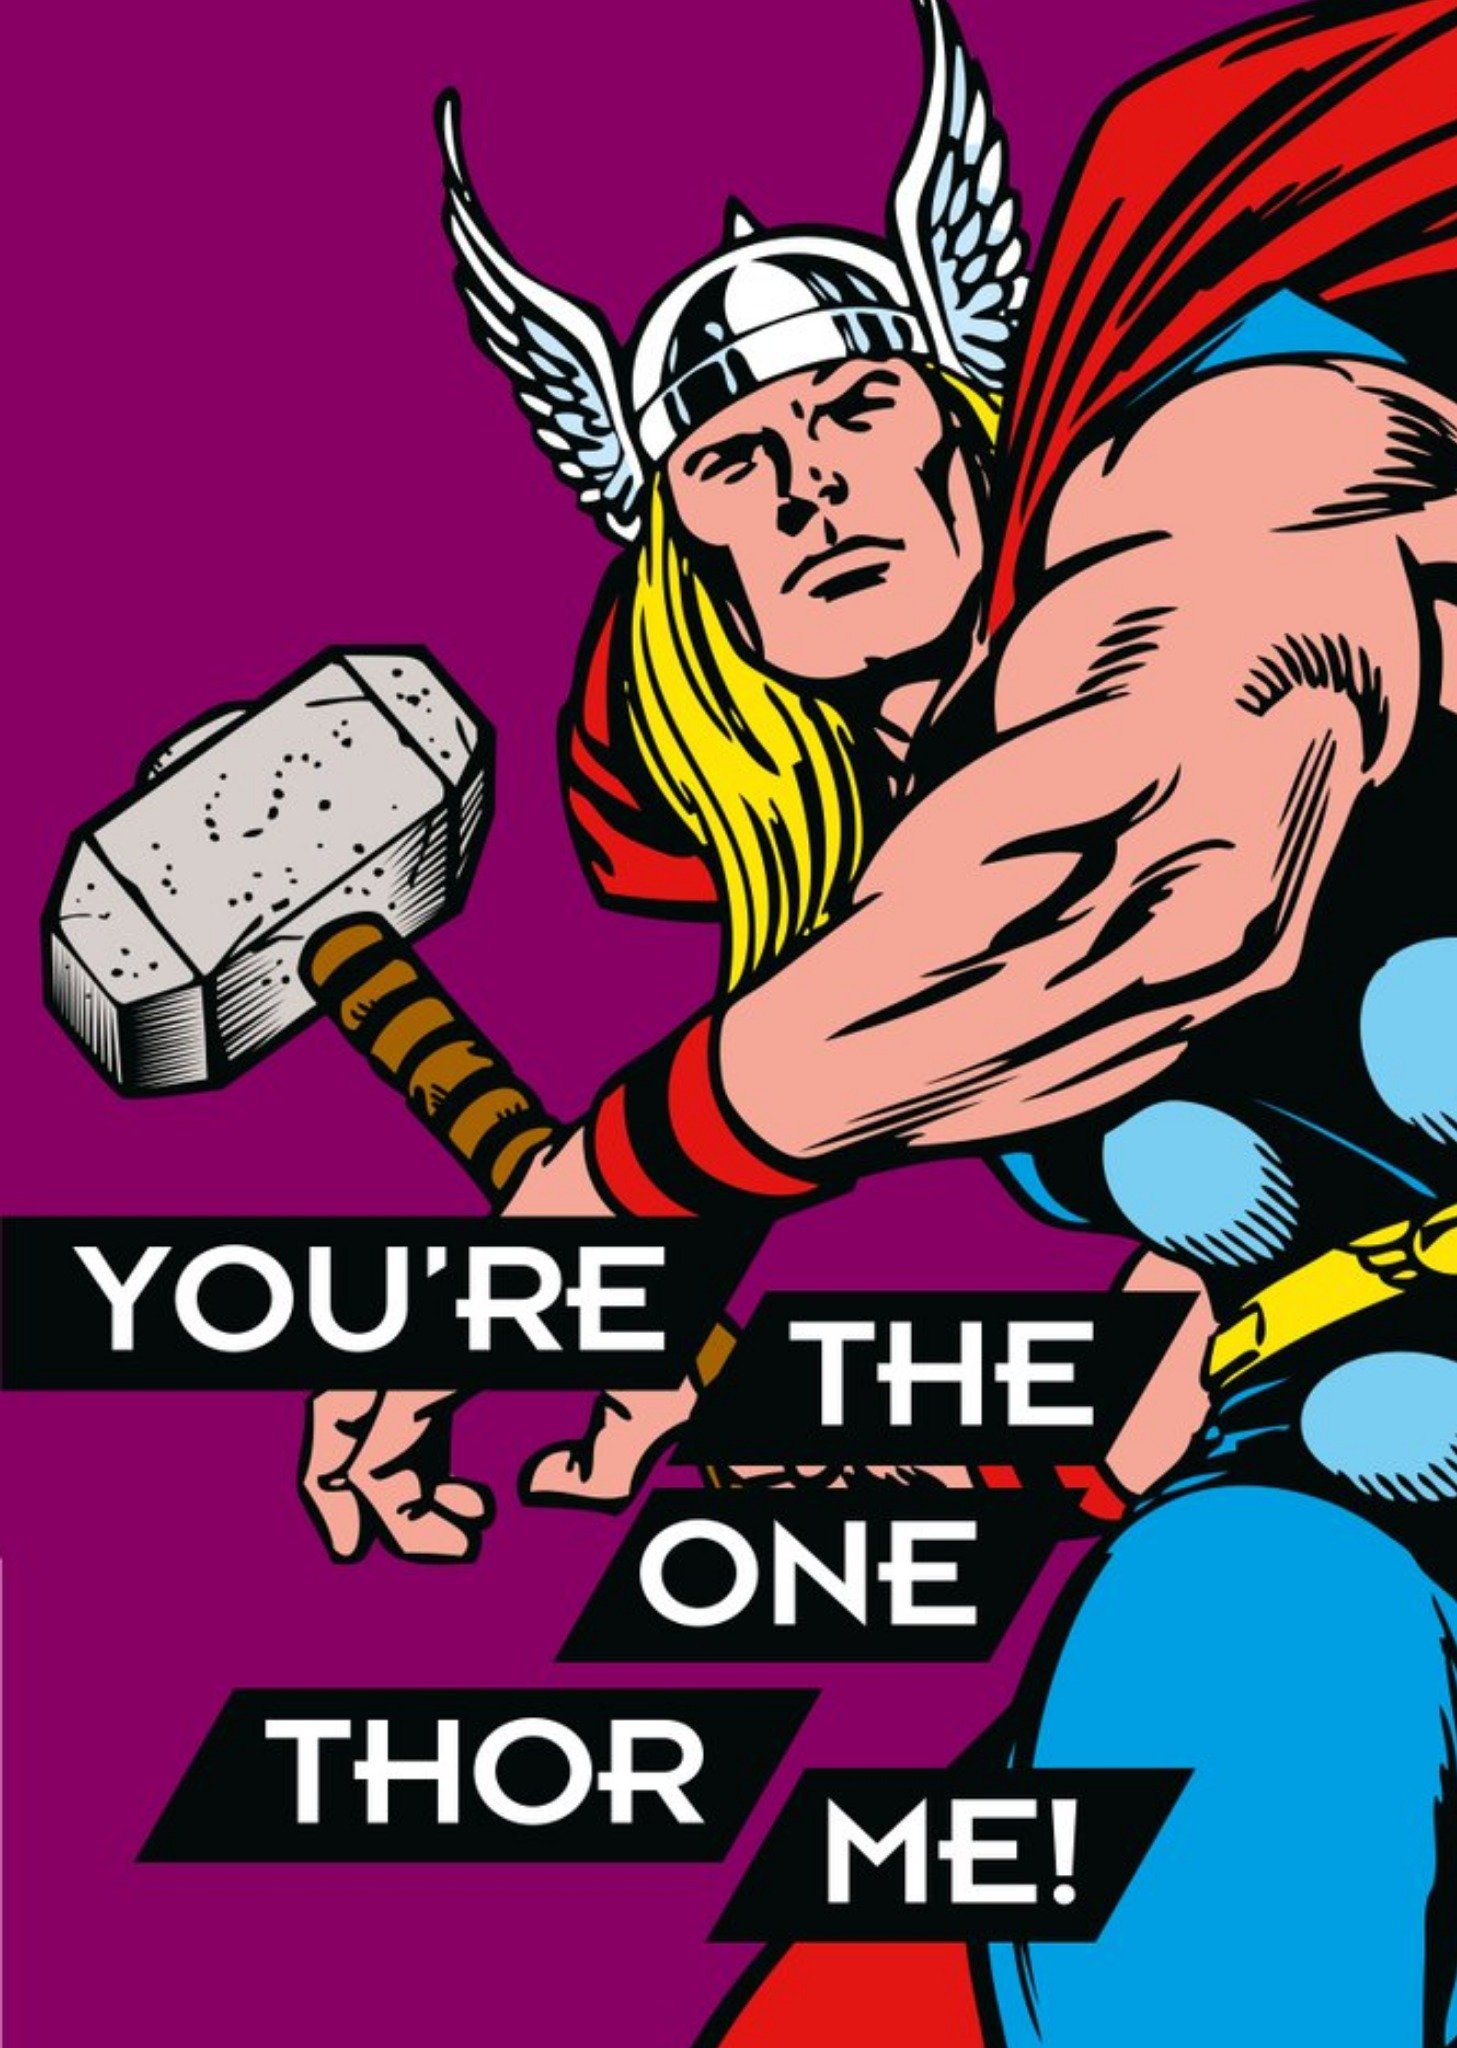 You're The One Thor Me Funny Pun Card From Marvel Avengers, Large